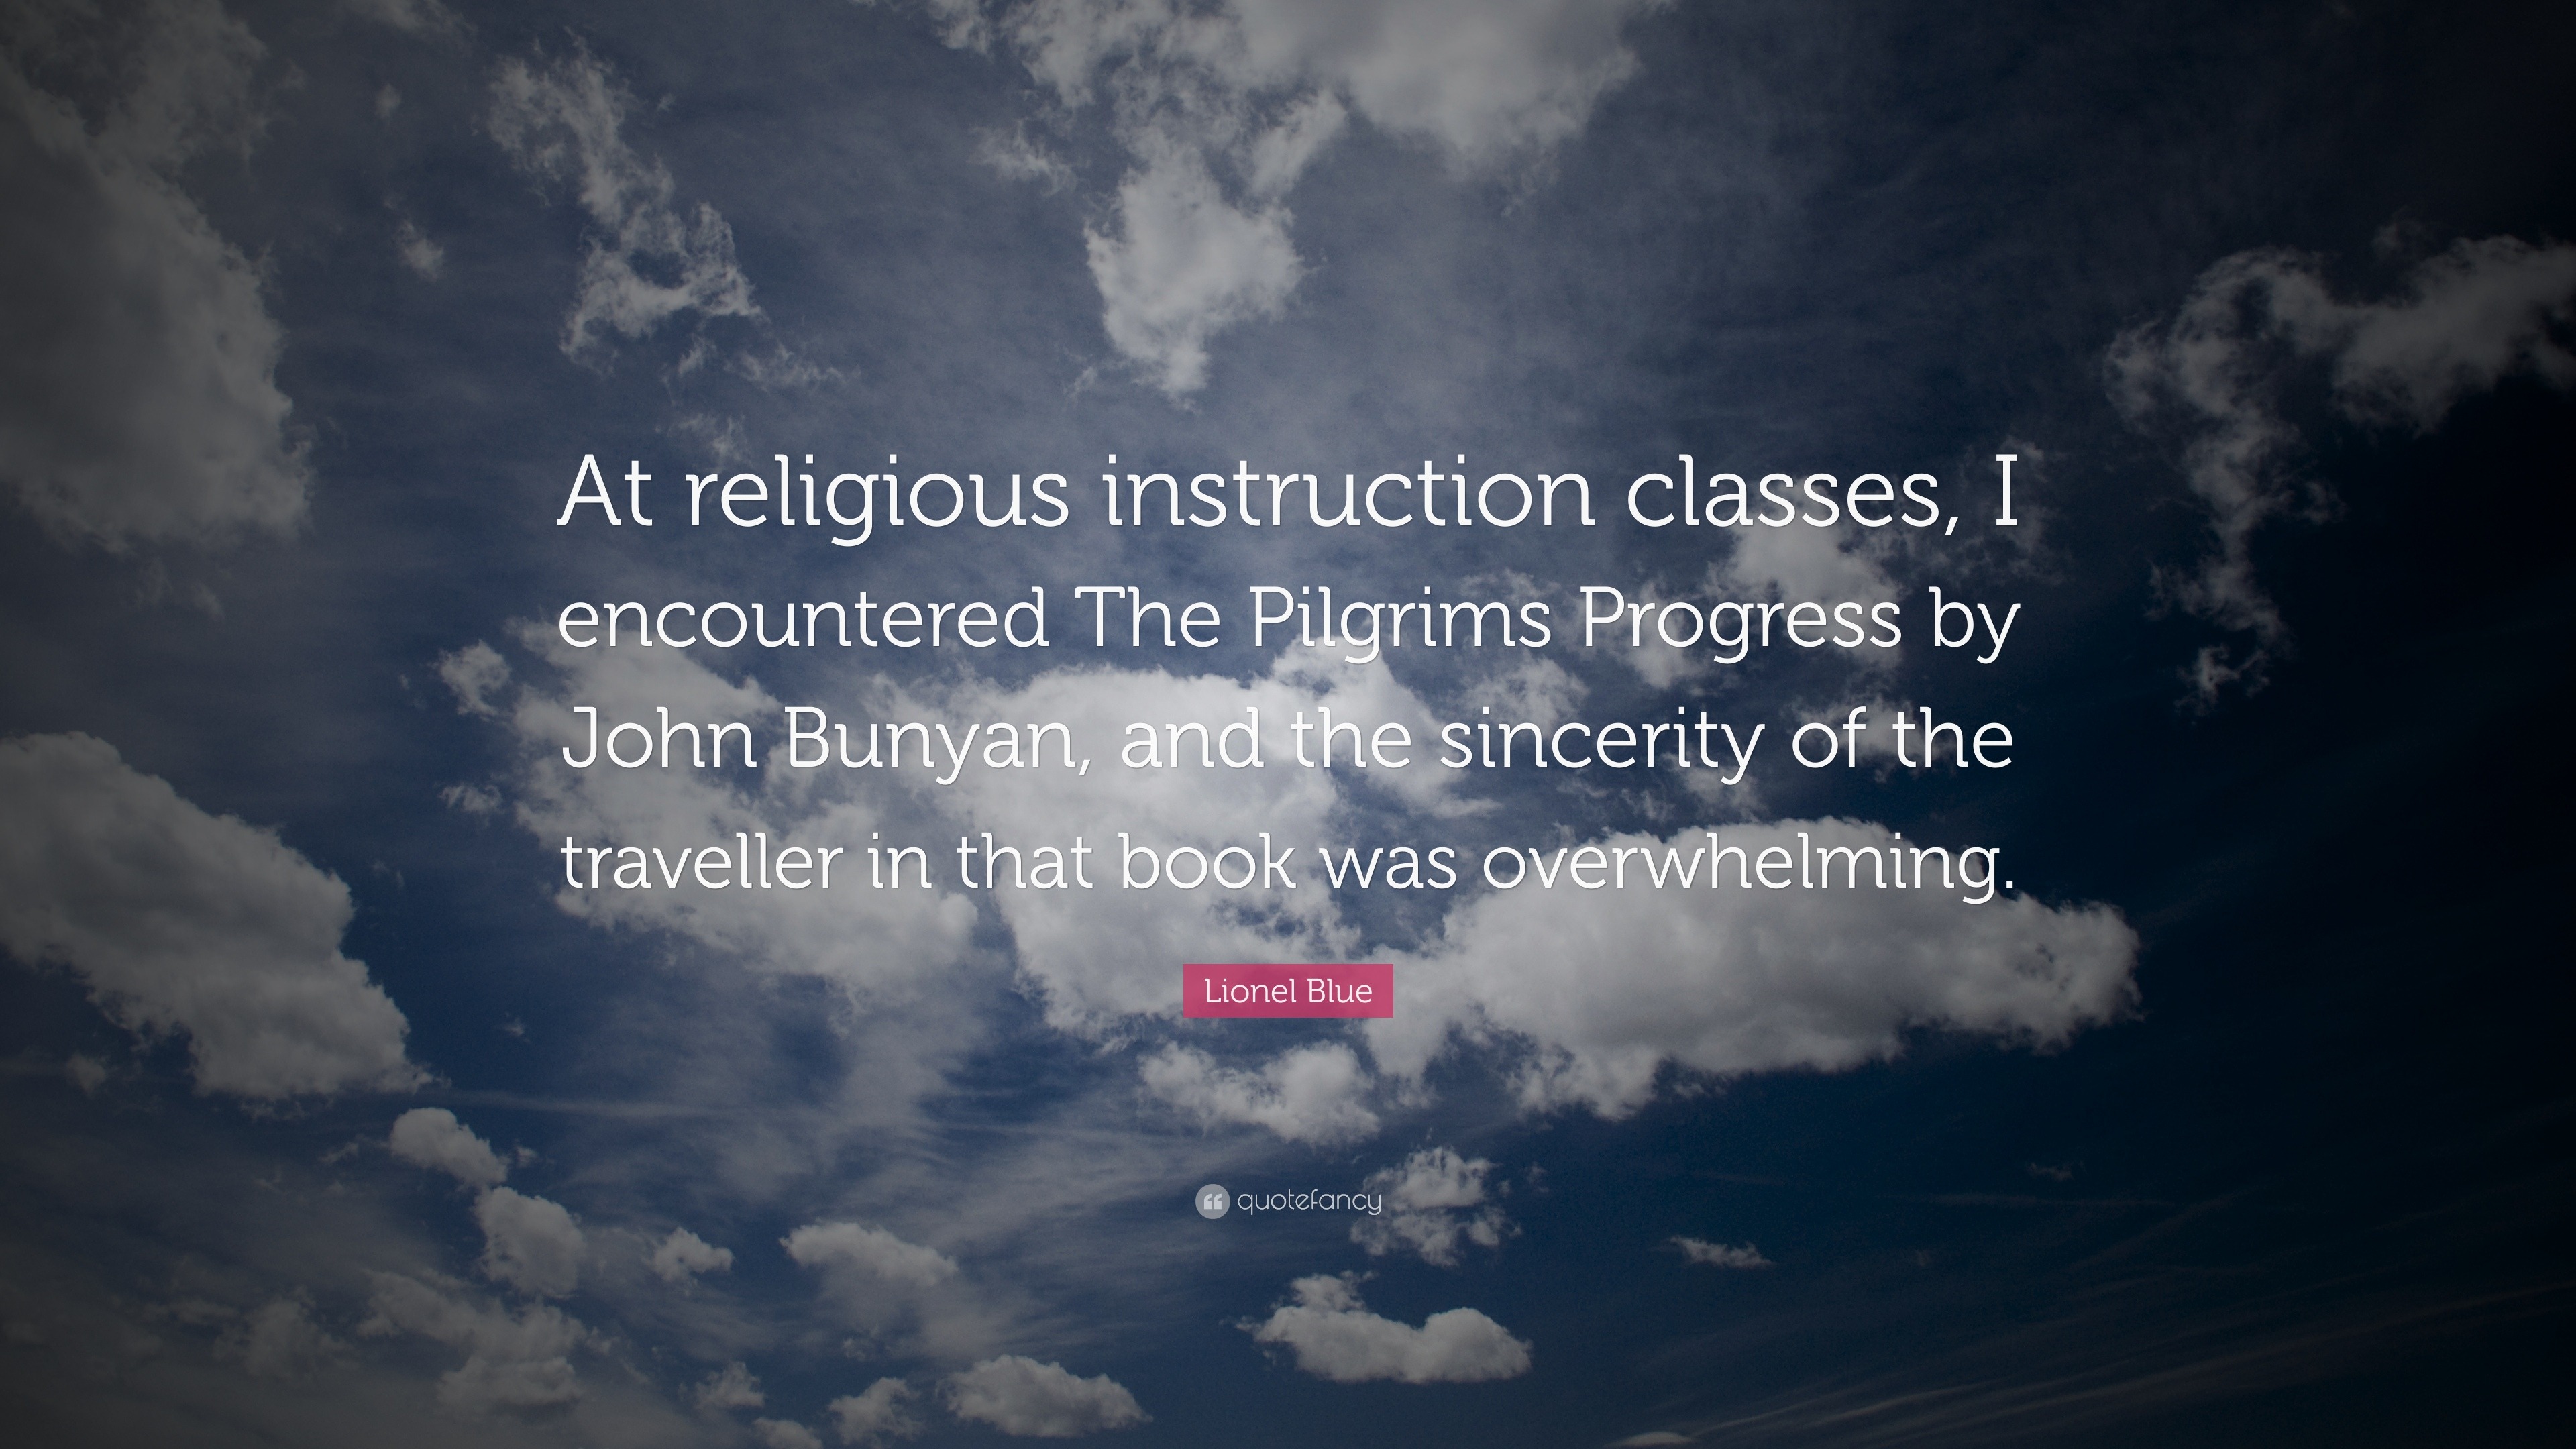 Lionel Blue Quote: “At Religious Instruction Classes, I Encountered The Pilgrims Progress By John Bunyan, And The Sincerity Of The Traveller...”